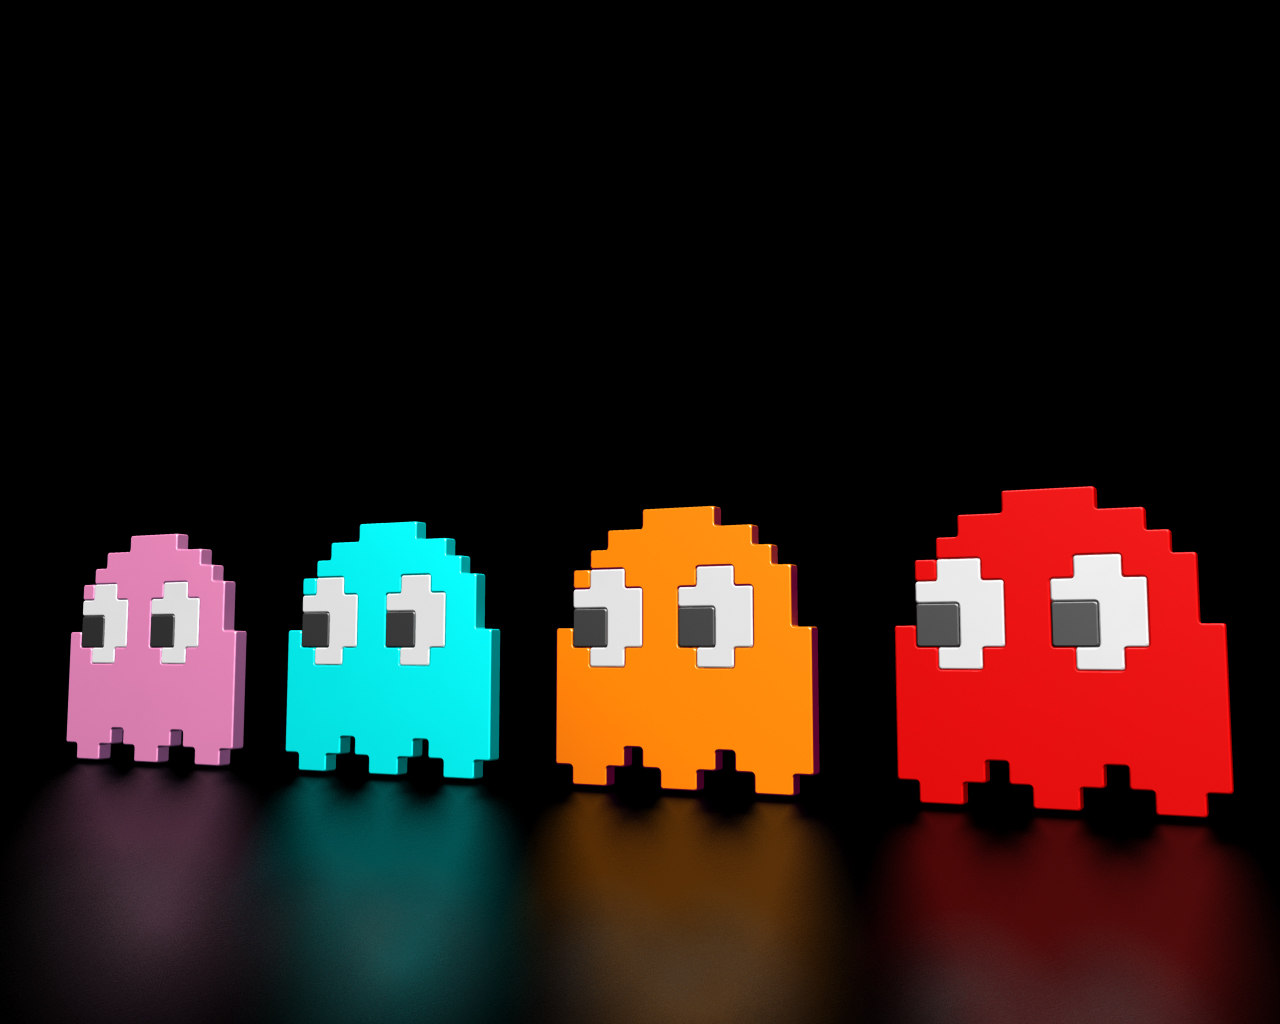 Pacman Ghost Wallpaper Background Pink Blue Orange Red Classic Game